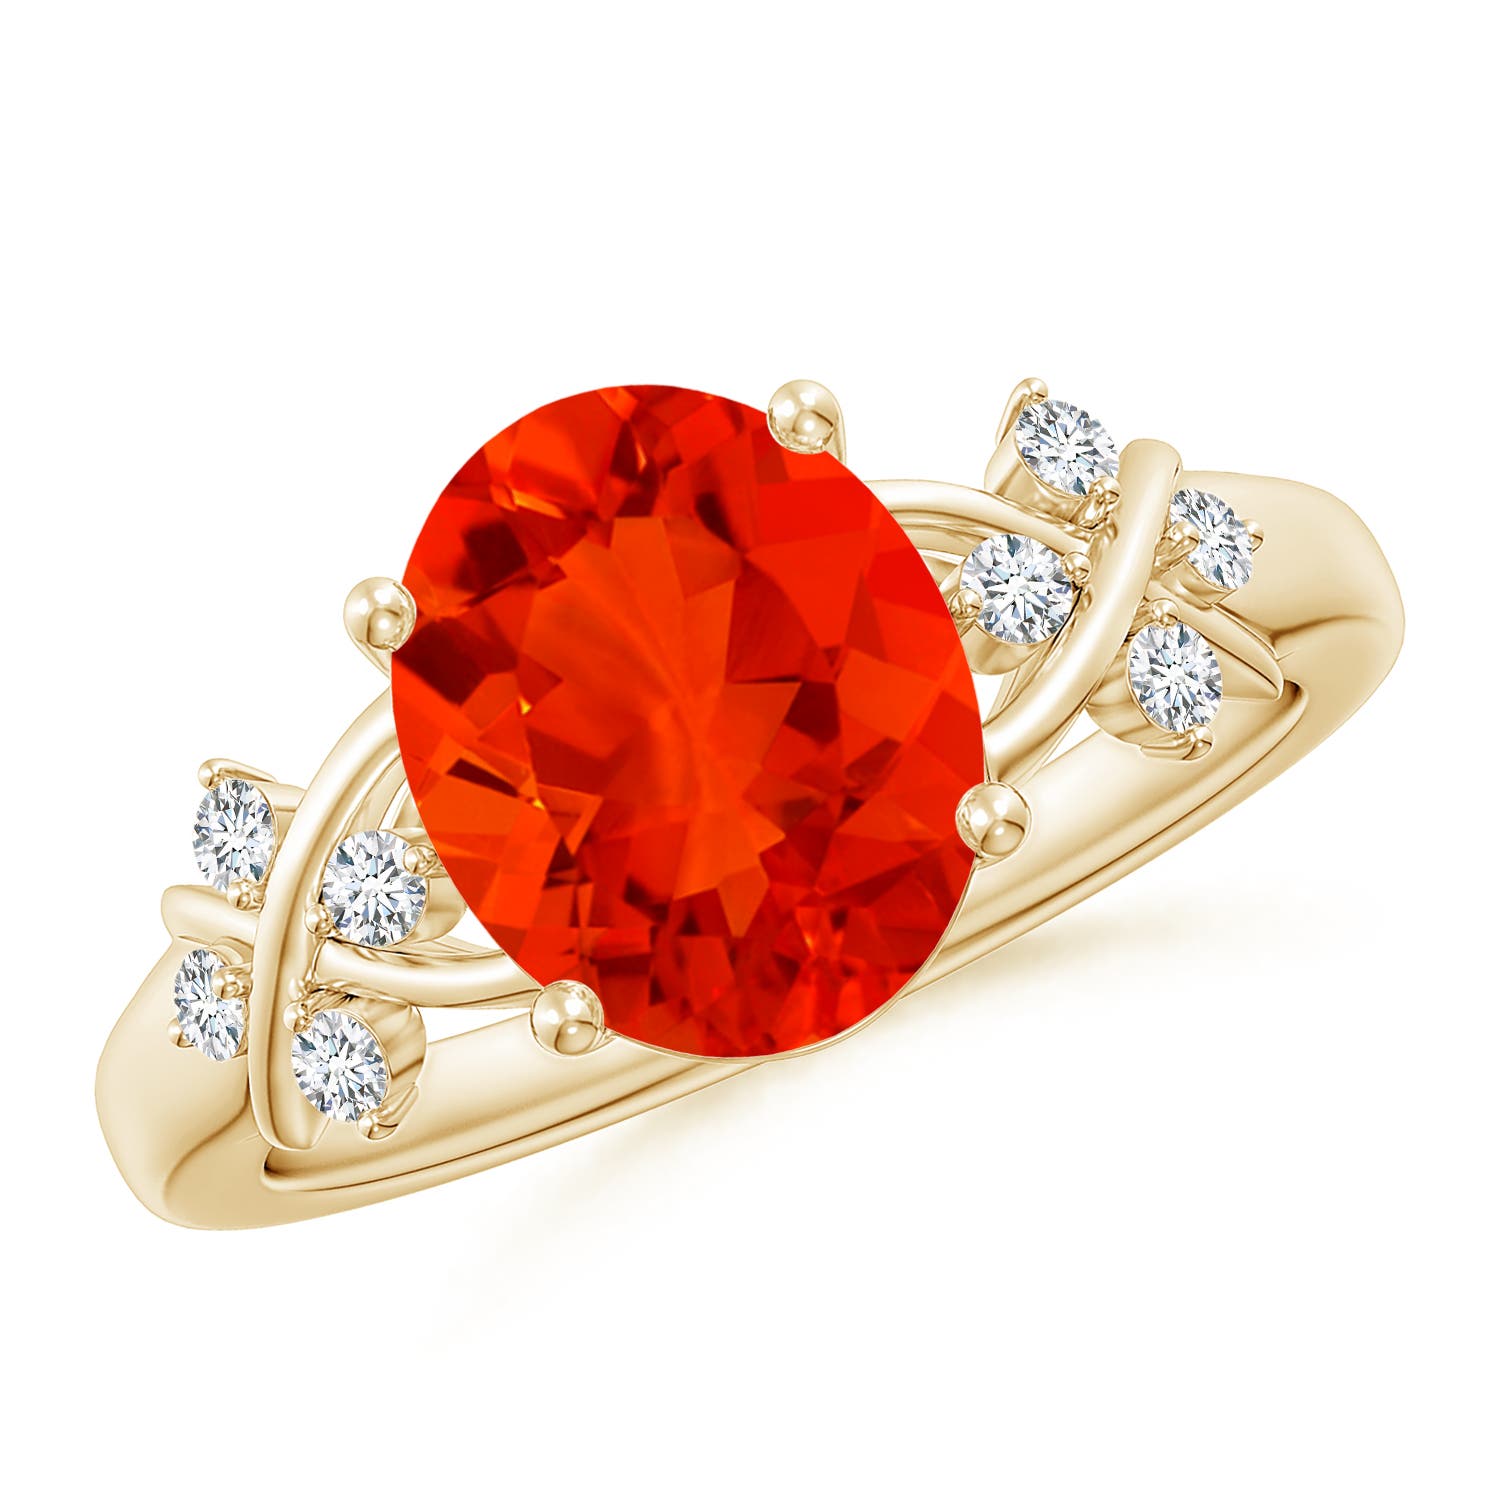 Shop Fire Opal Jewelry with Unique Designs | Angara